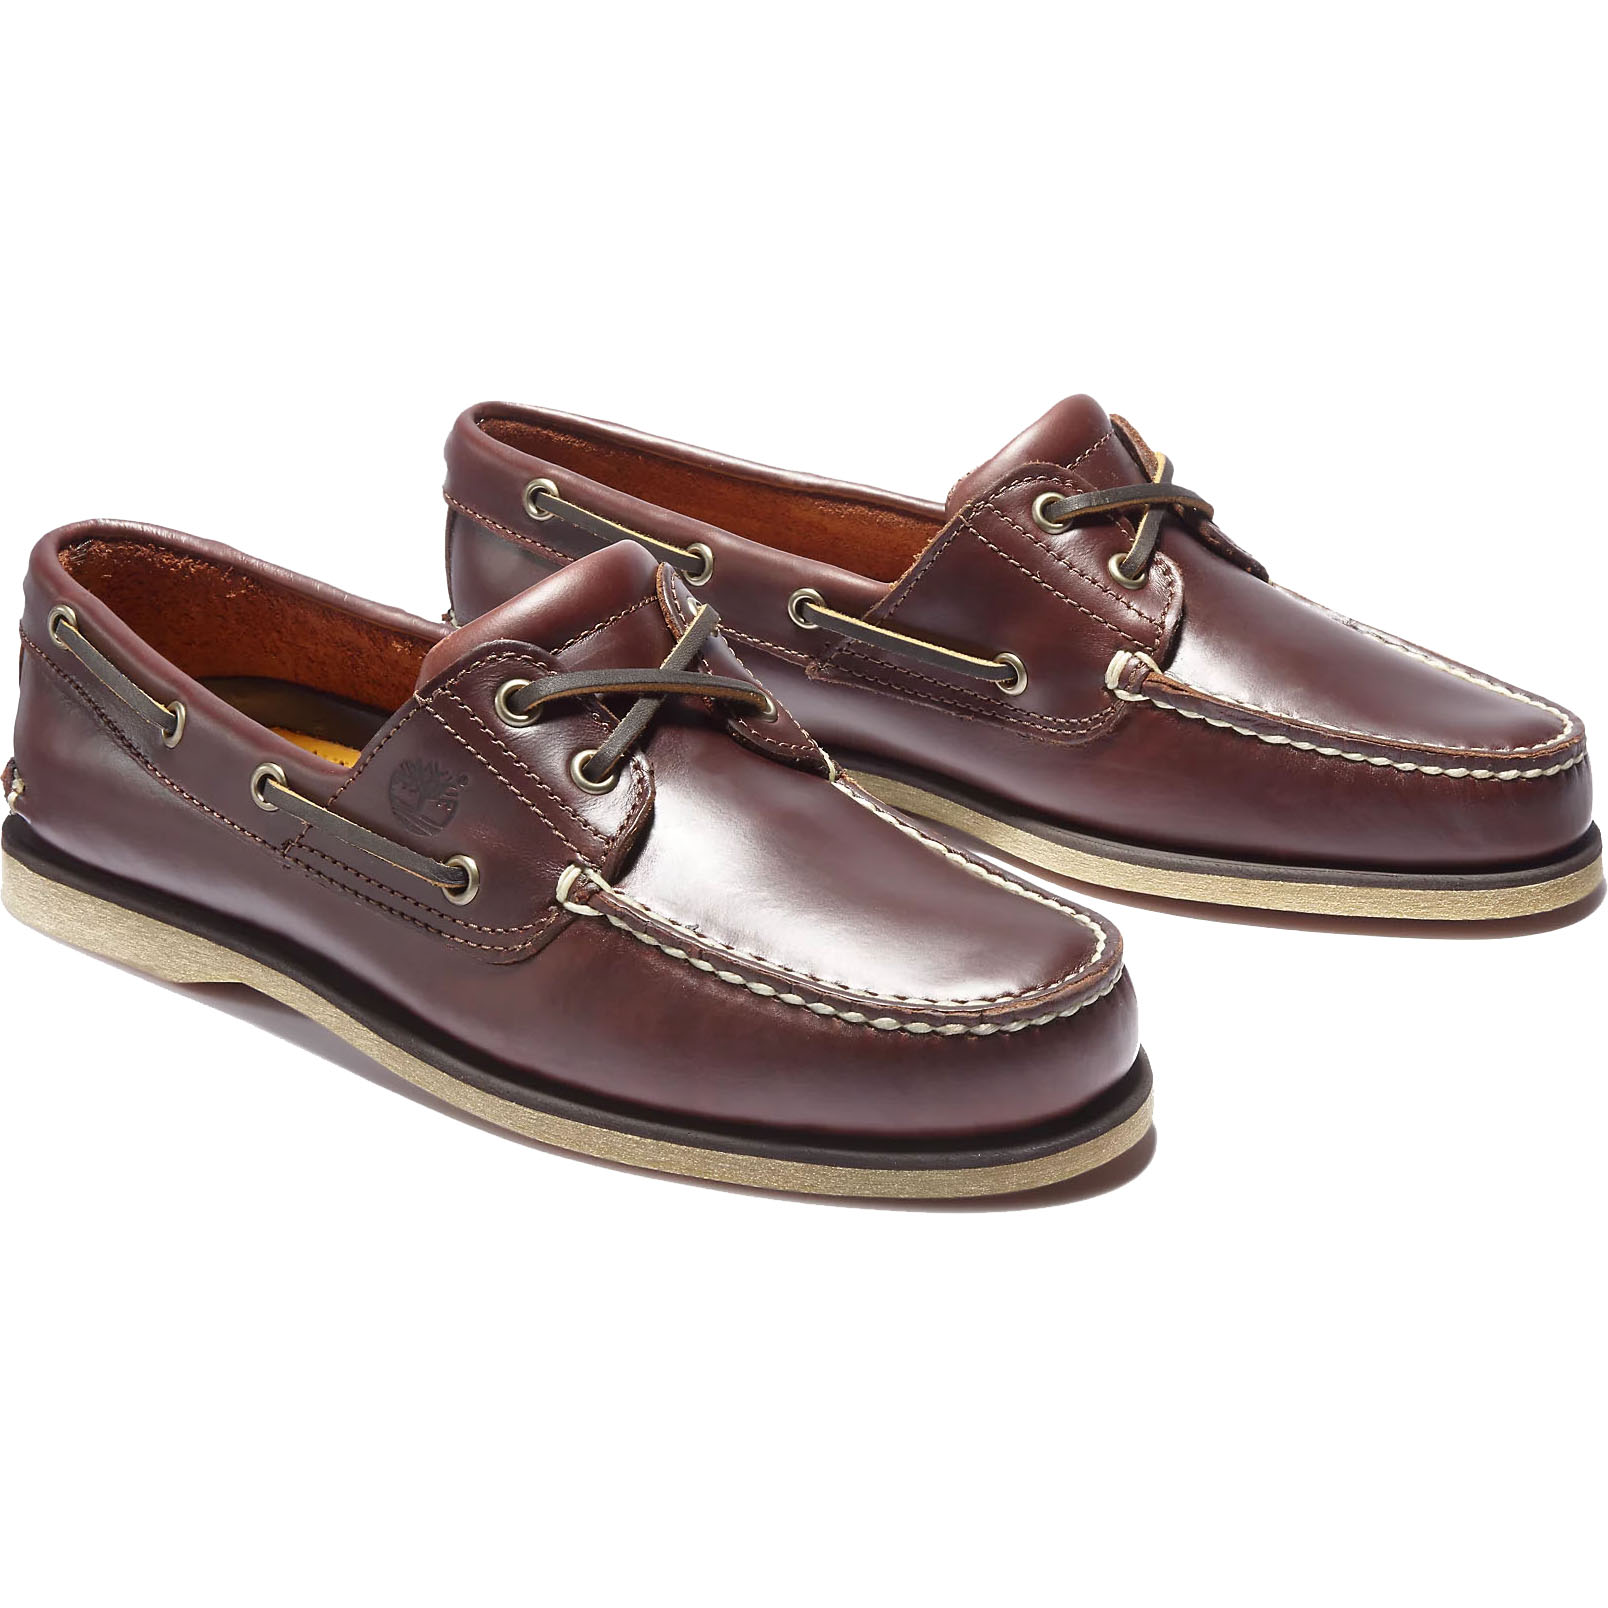 Timberland Men's Classic Boat Shoes - Rootbeer 25077